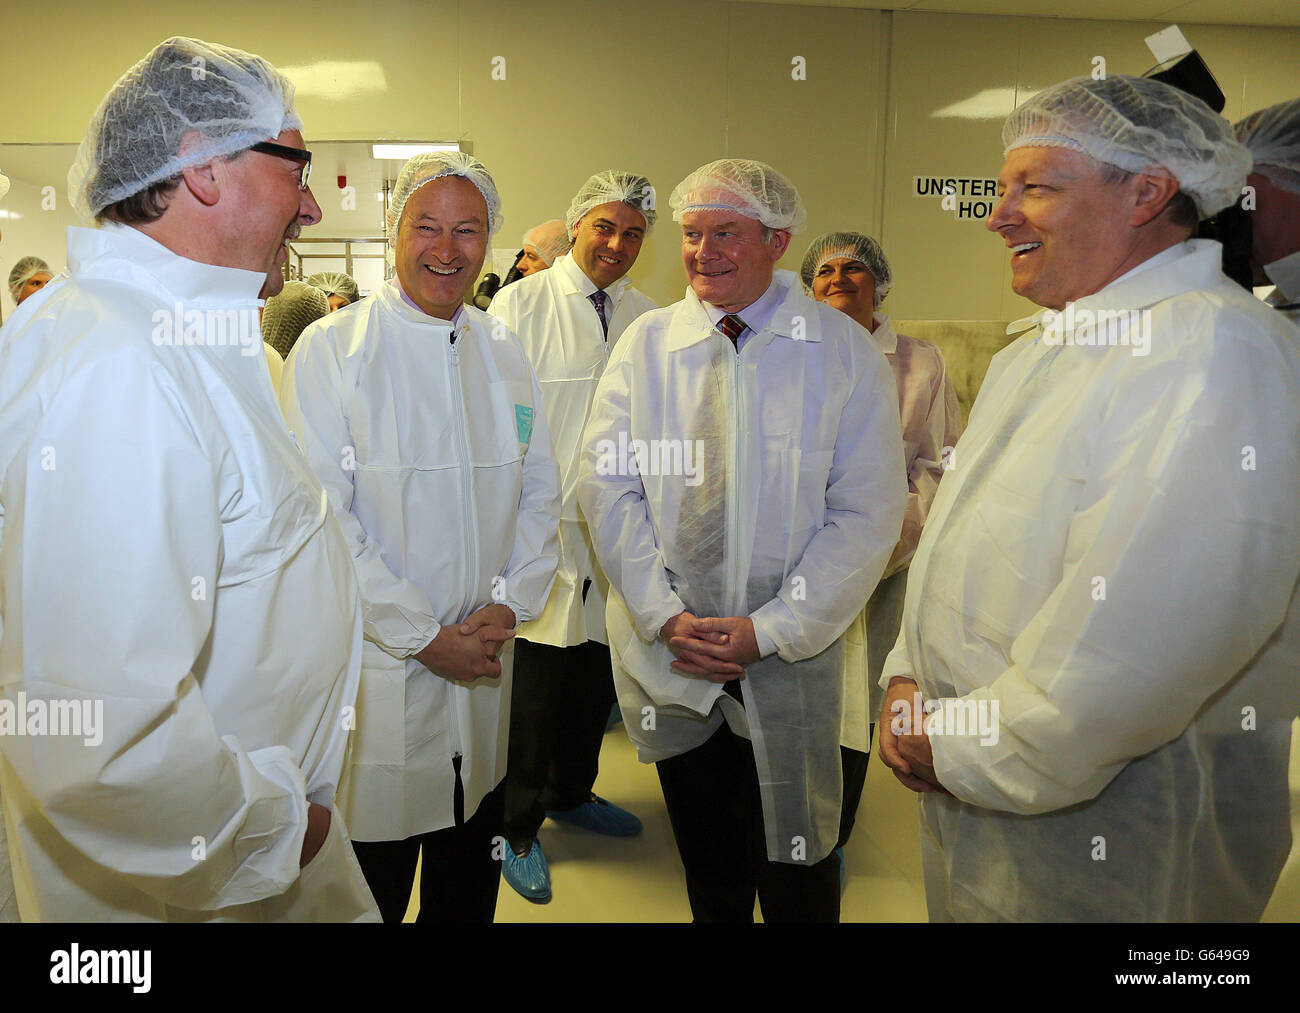 First Minister Peter Robinson (right) with Deputy First Minister Martin McGuiness (second right) chat with Finance Minister Sammy Wilson (left) and Troy Deppey of Terumo BCT, during a tour of the Terumo BCT factory in County Antrim, Northern Ireland. The Japanese global healthcare company that manufactures products used in the treatment and transfusion of blood is creating 416 jobs in Northern Ireland. Stock Photo